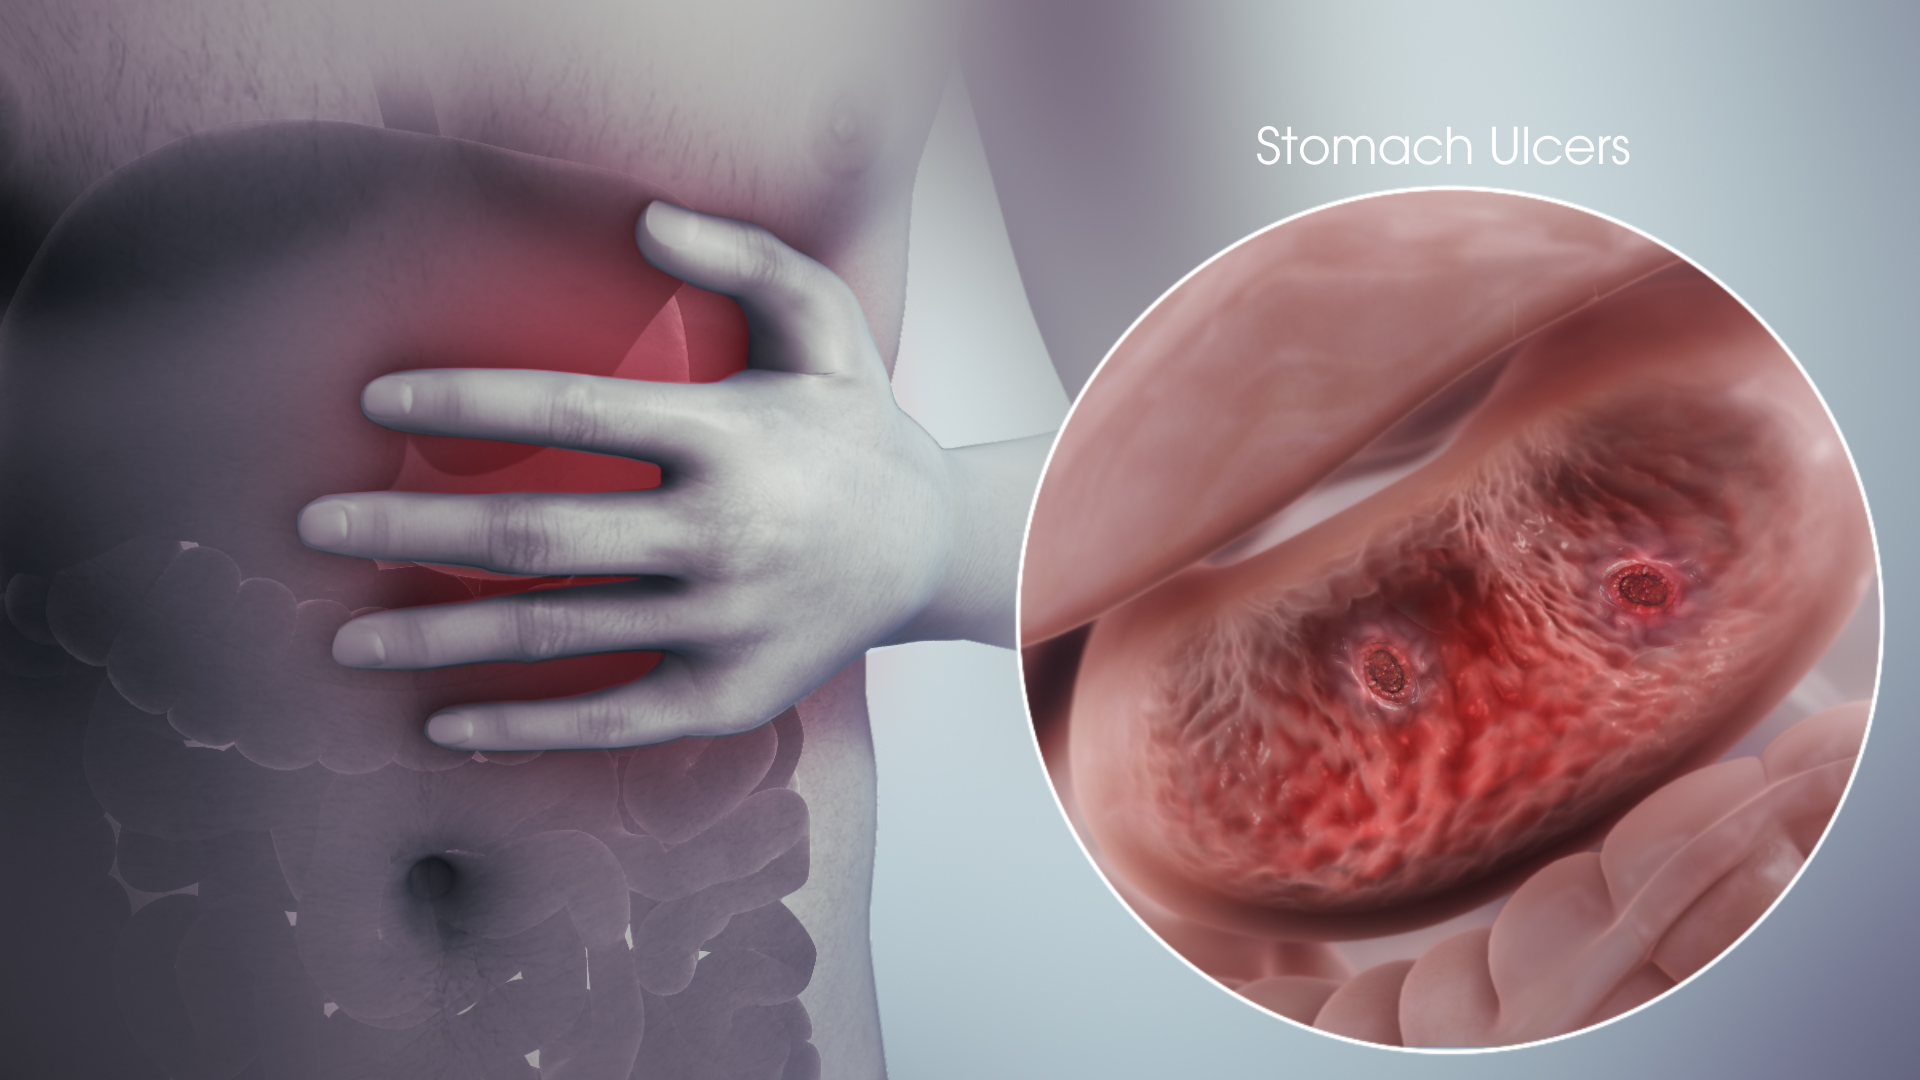 3D Medical Animation still showing Stomach Ulcer